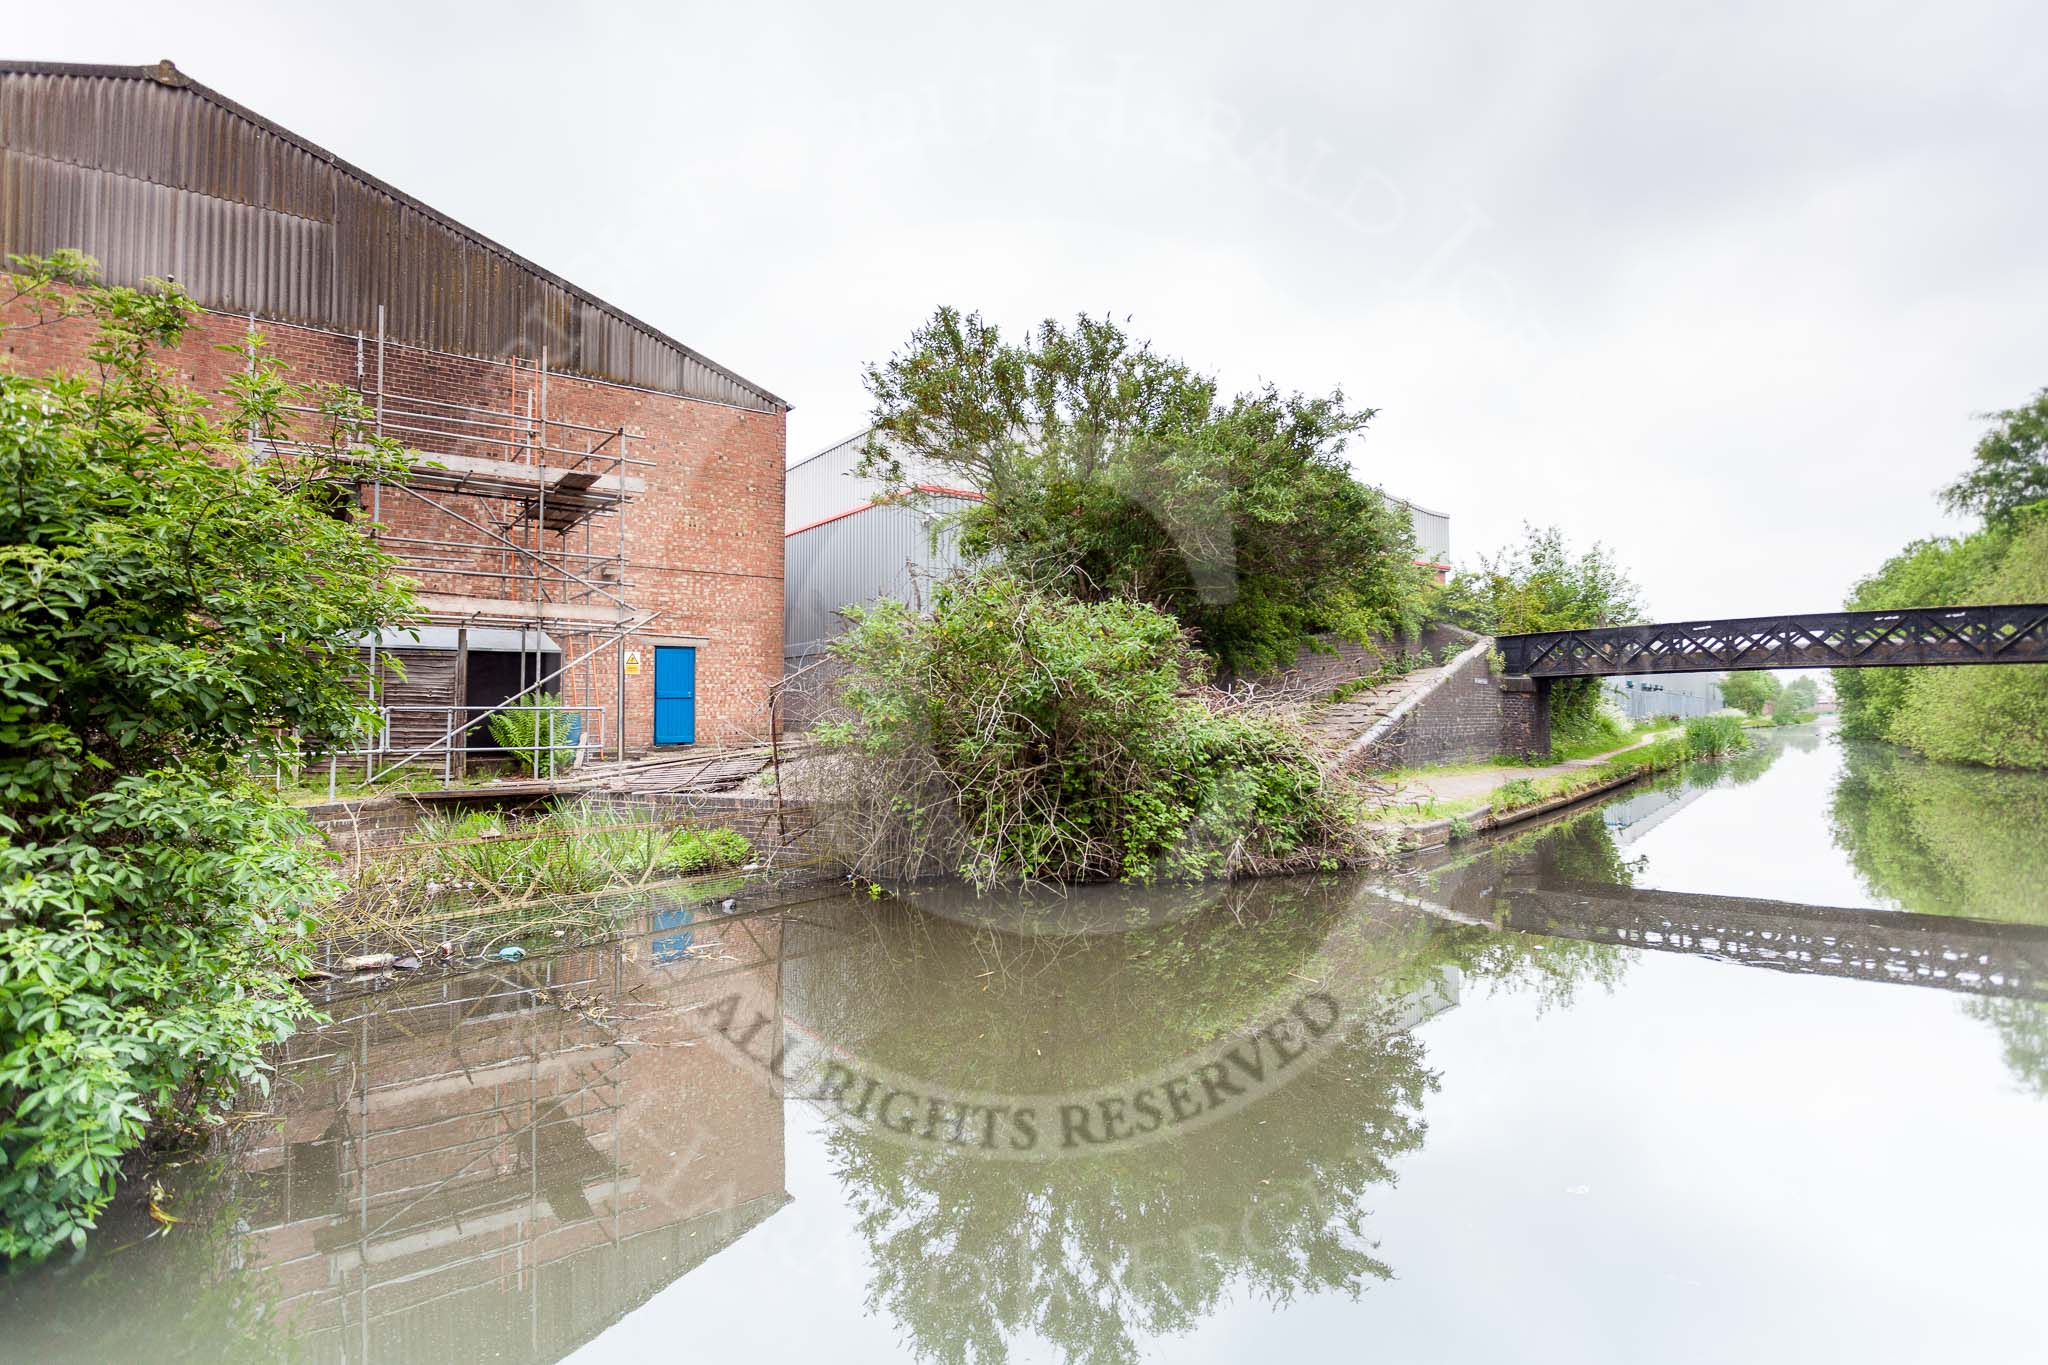 BCN 24h Marathon Challenge 2015: On the left the former entrance to the Union Branch.
Birmingham Canal Navigations,



on 23 May 2015 at 12:53, image #106